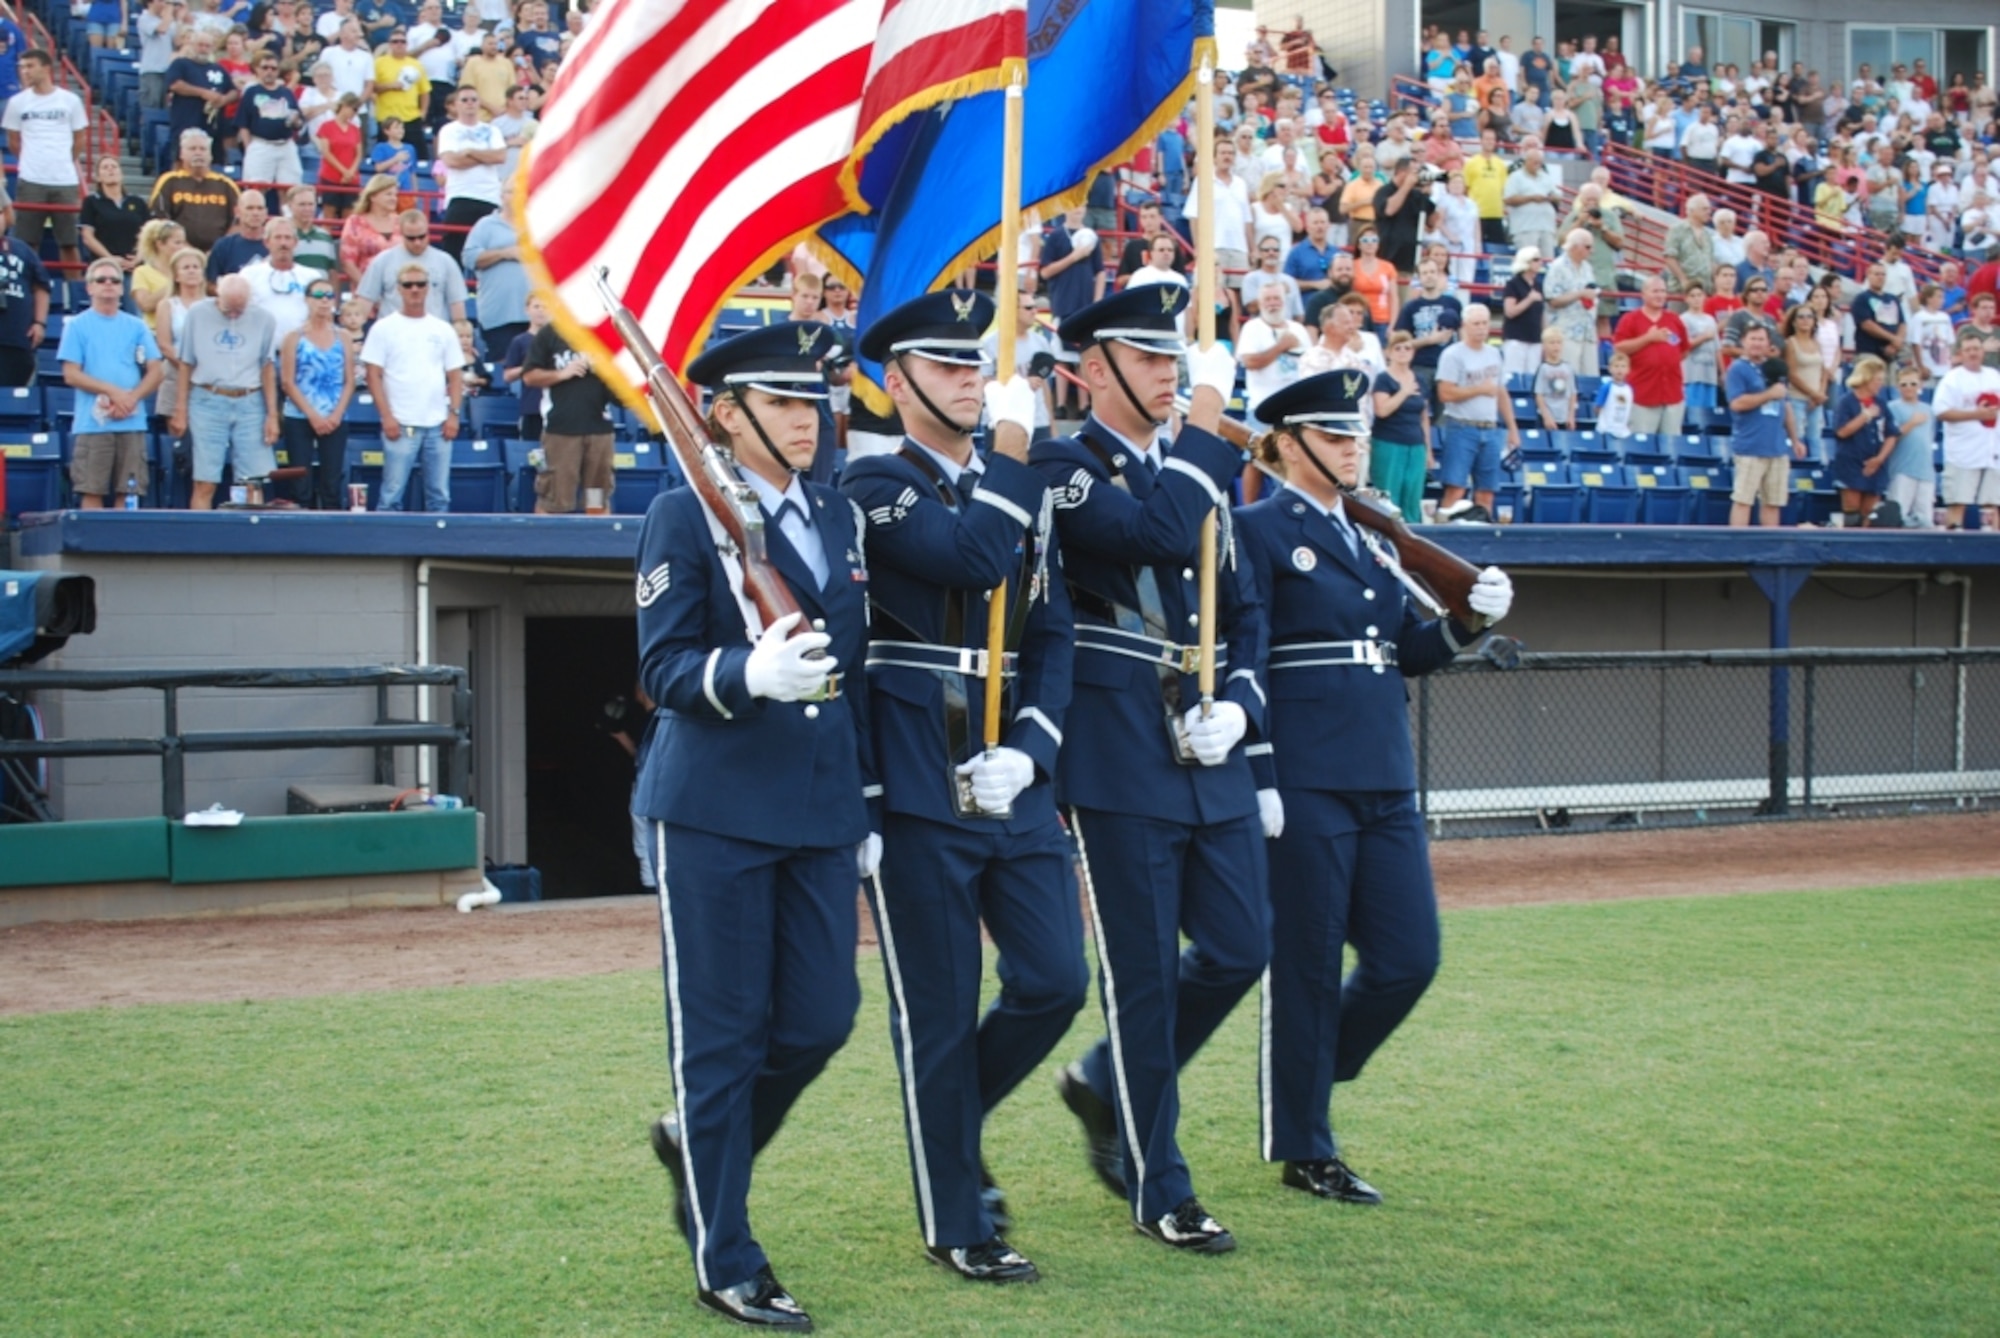 45th Space Wing Honor Guard provides colors before game. 